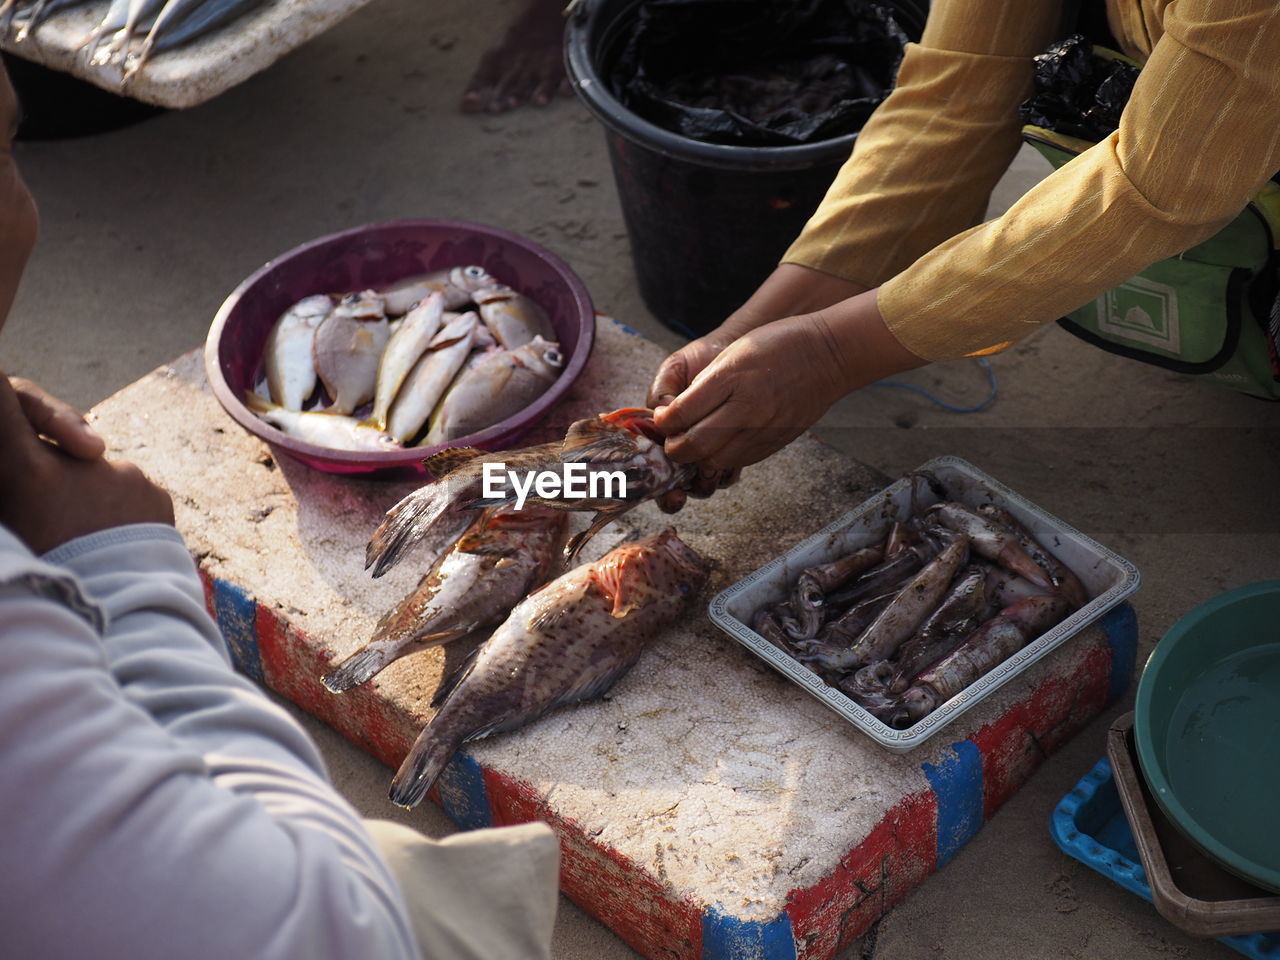 Cropped hands holding fish for sale